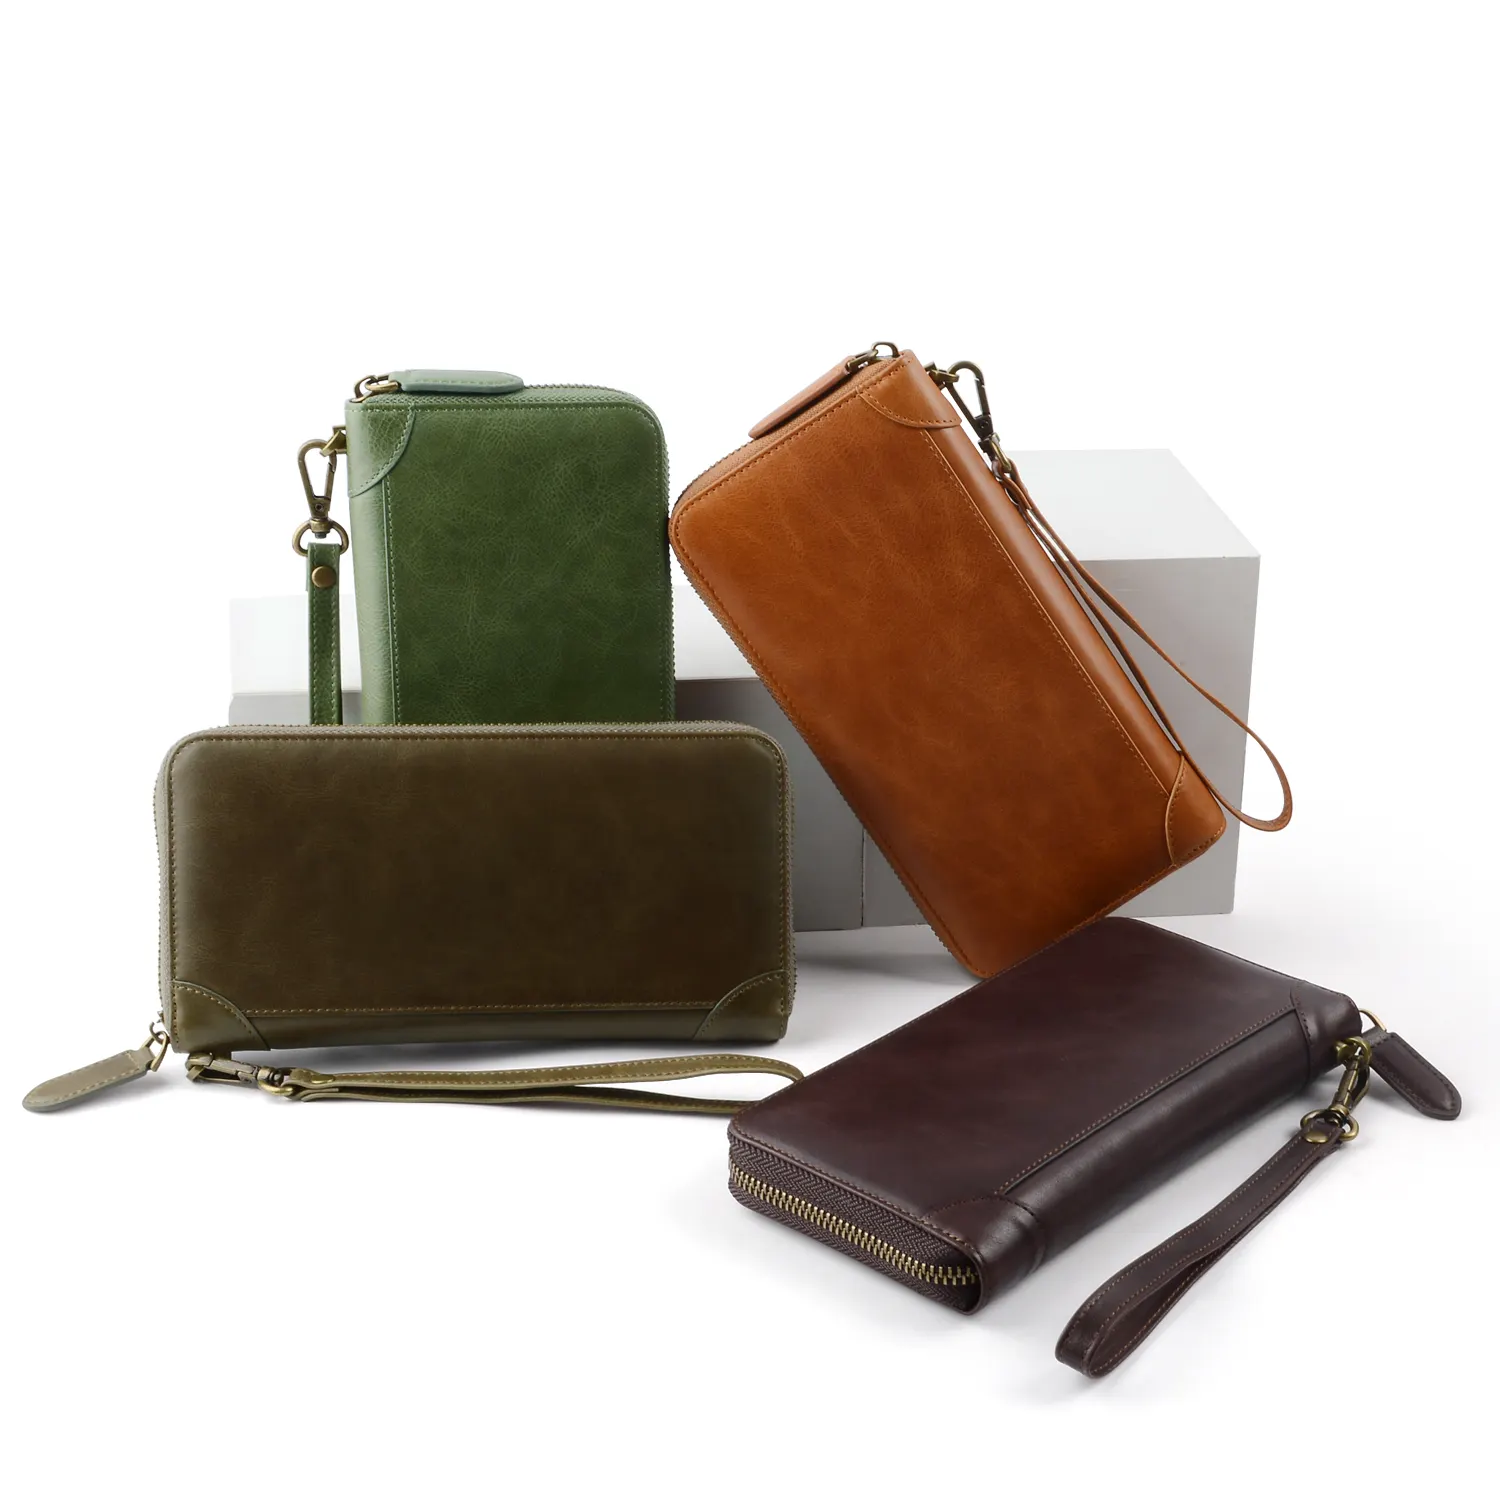 Green Vintage RFID Long Genuine Leather Wallet with card holder Zipper Wallet with Detachable Wrist Strap